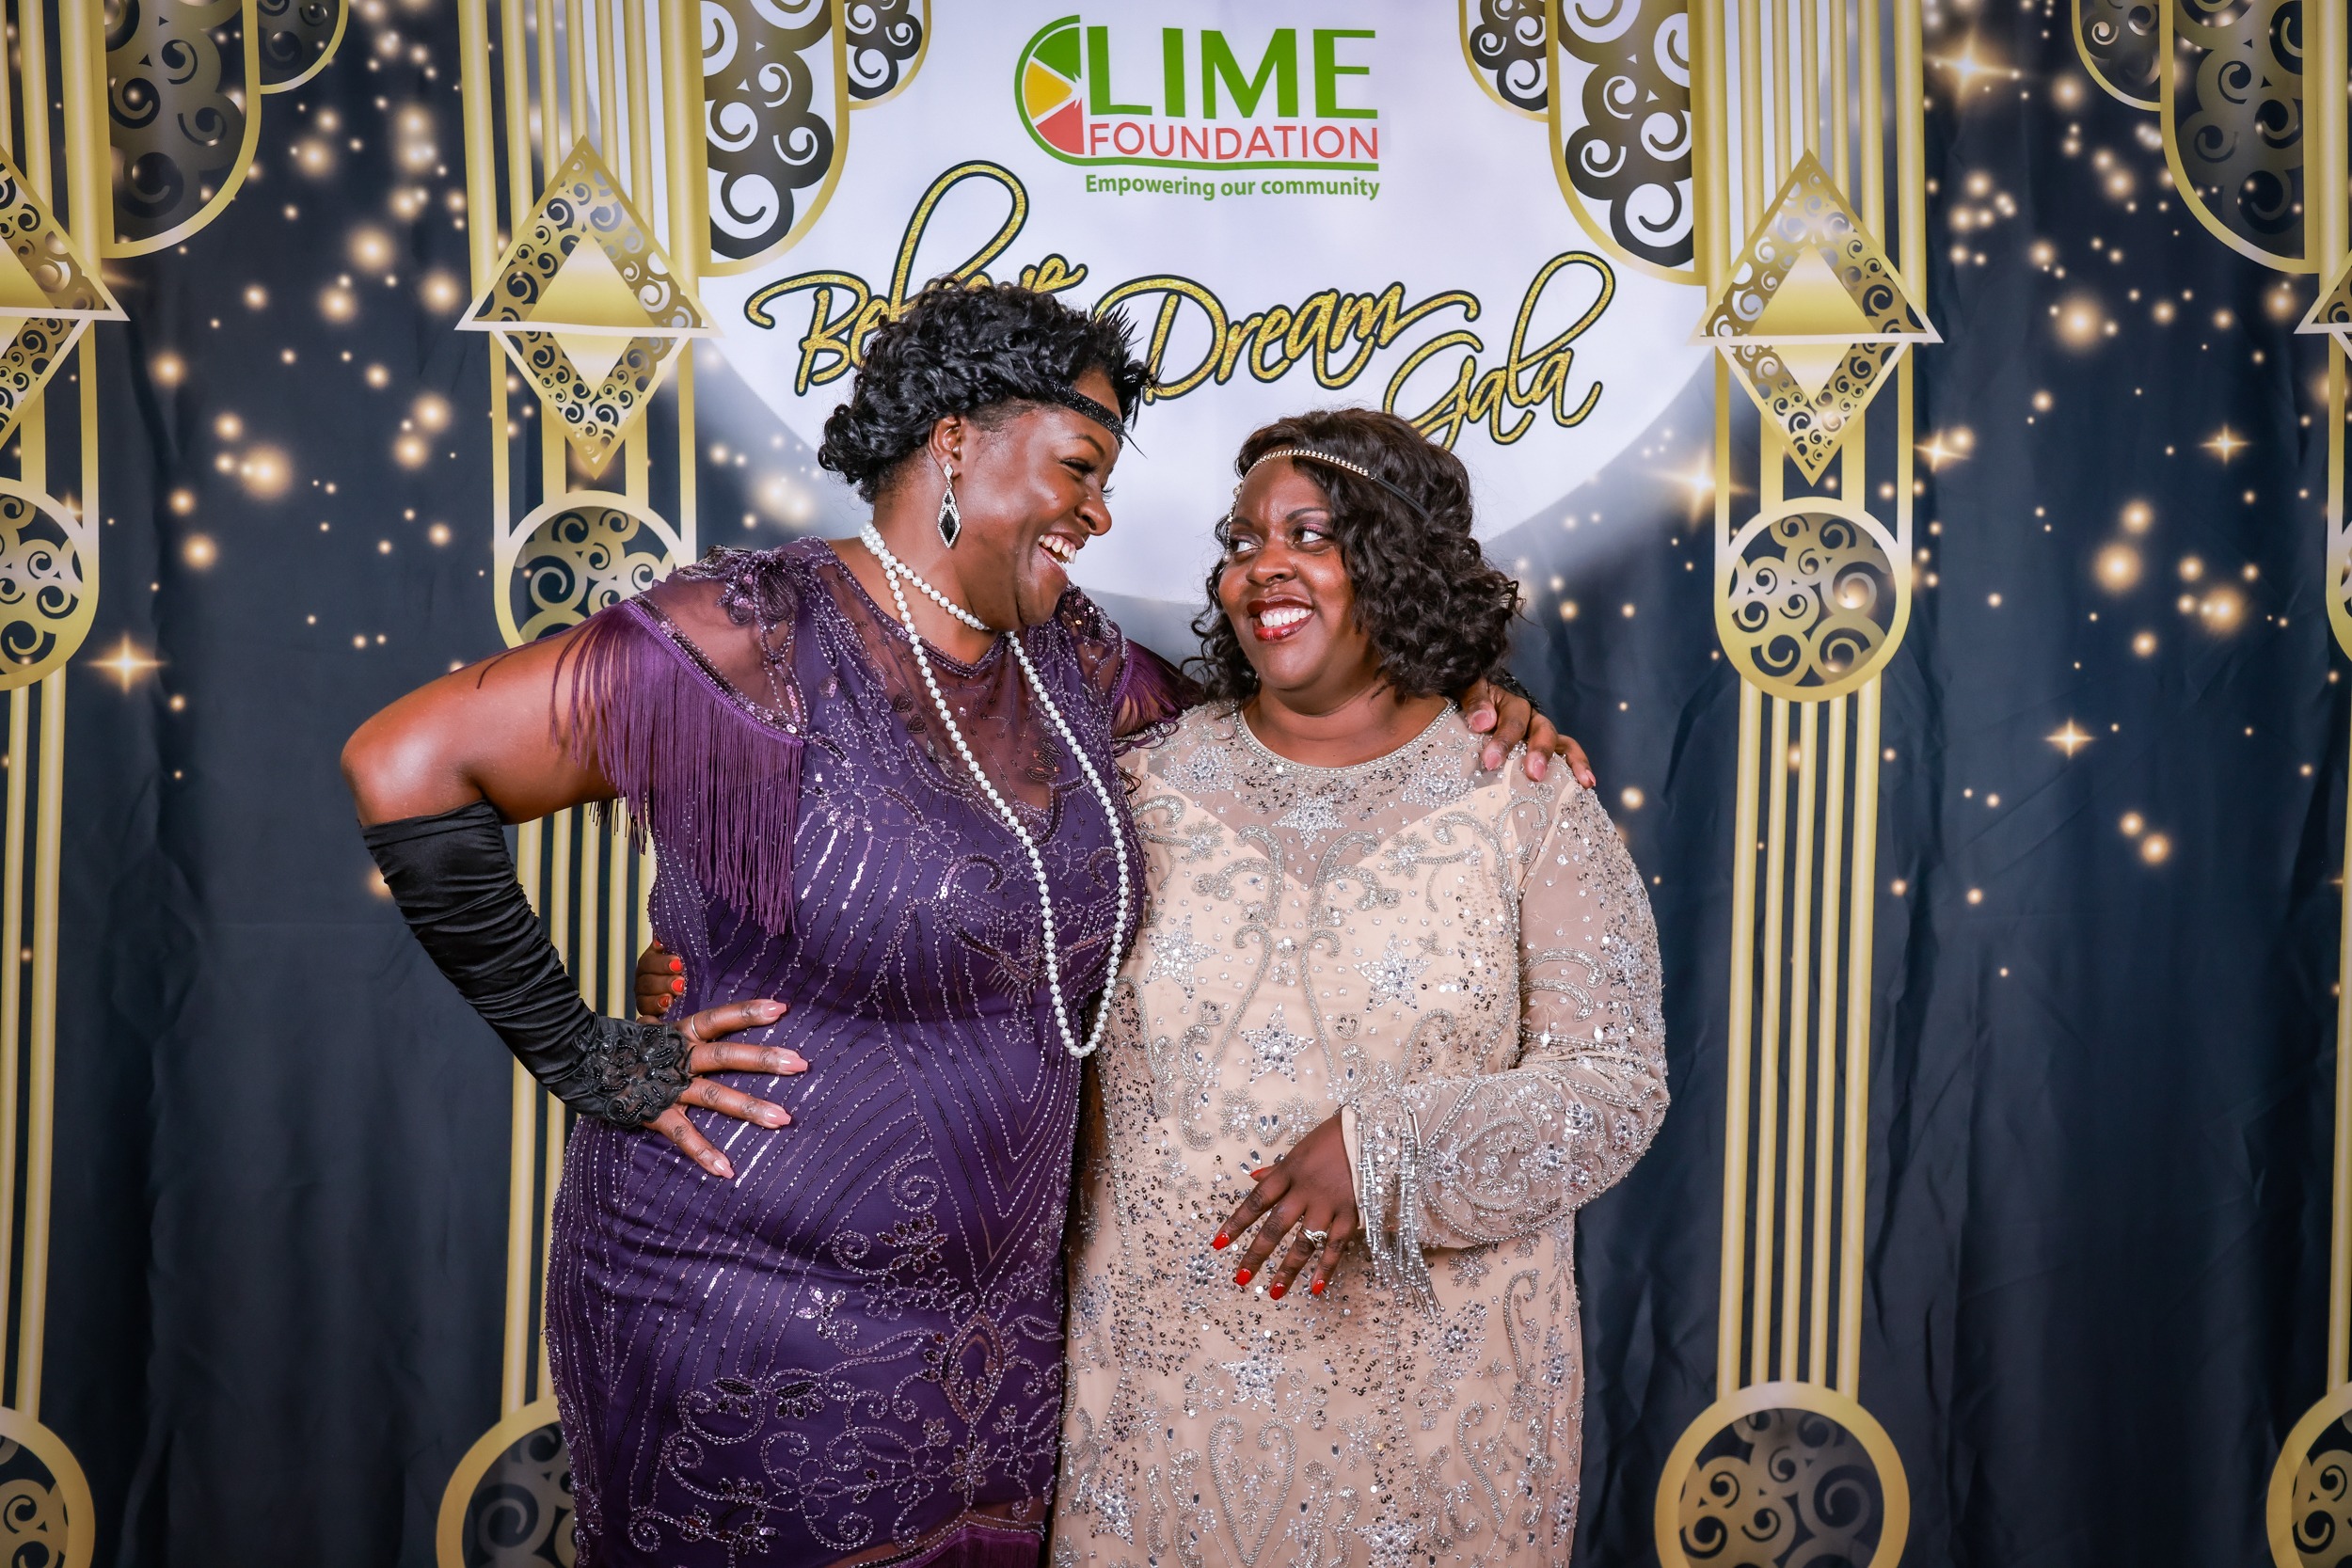 Two women posing for a photo at a 1920's themed party hosted by LIME Foundation.